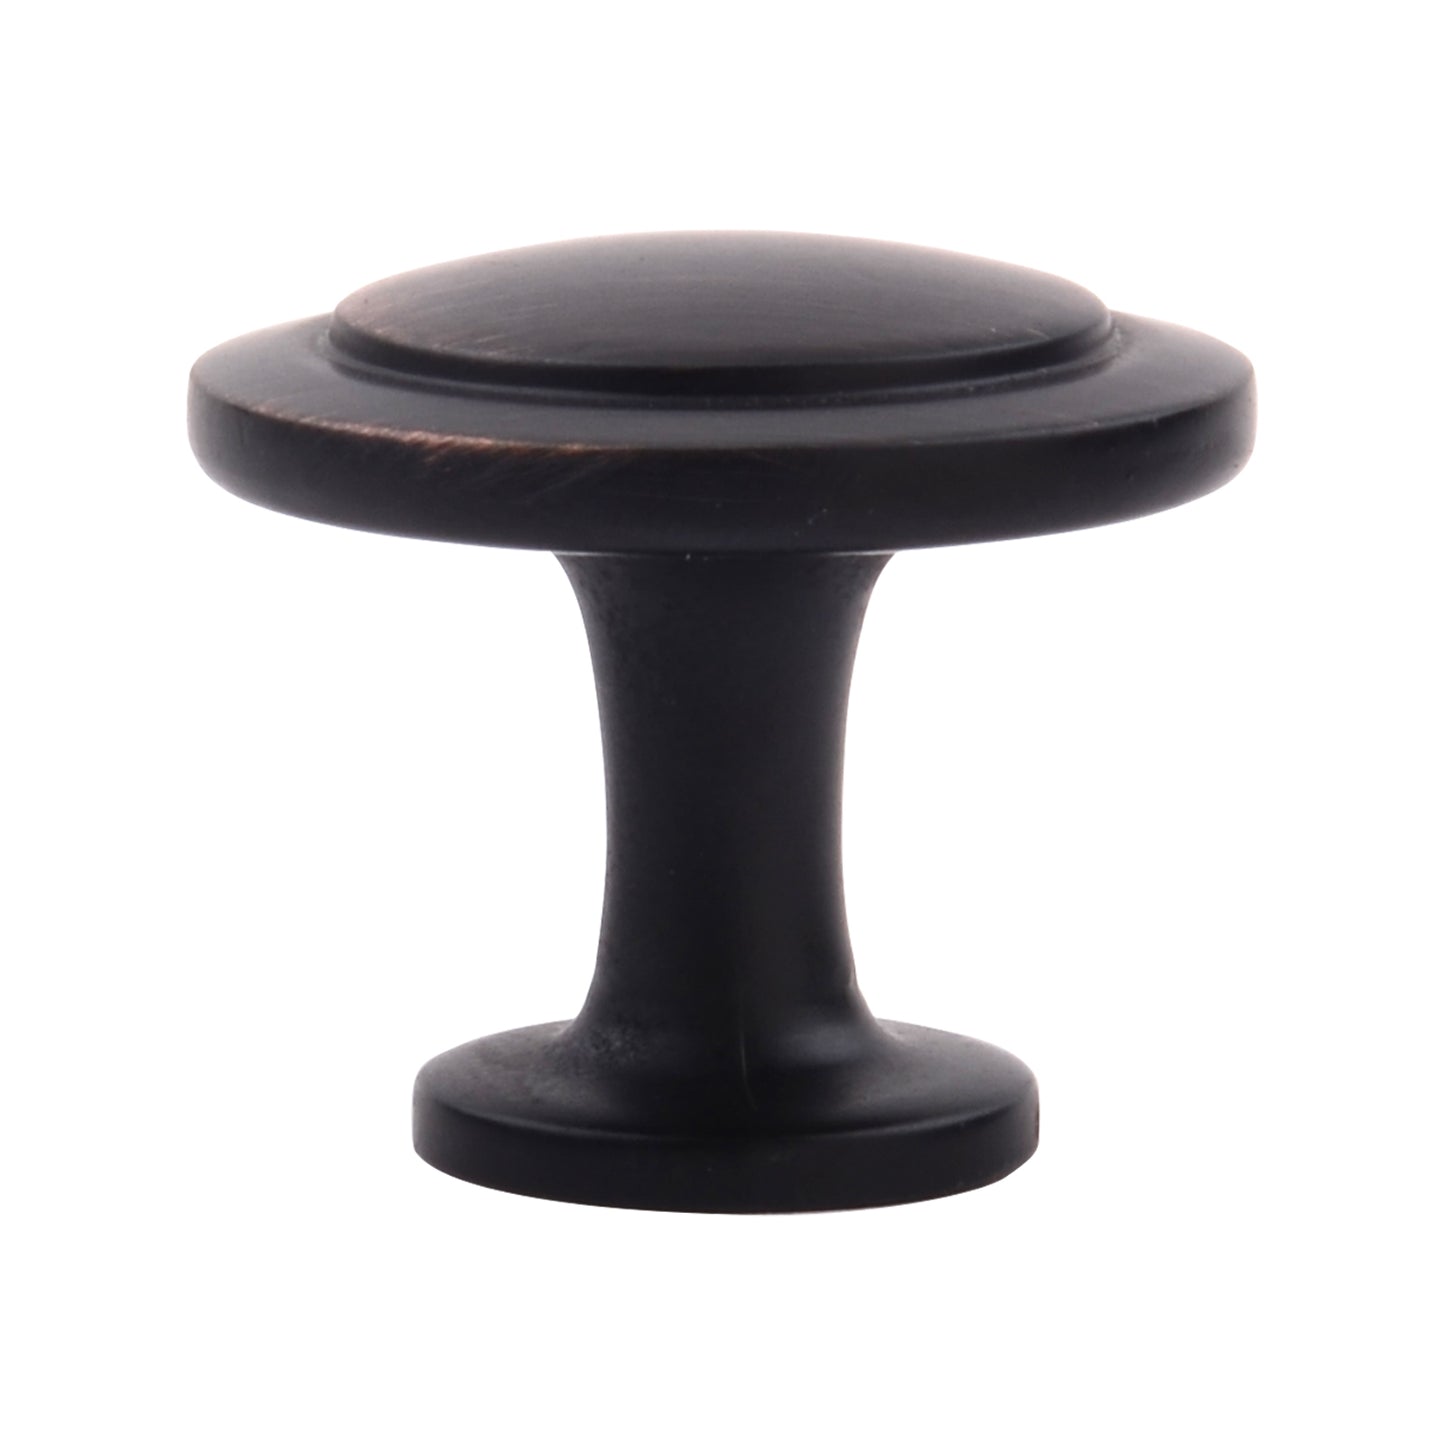 South Main Hardware 1-1/4 in. Oil Rubbed Bronze Round Cabinet Knob